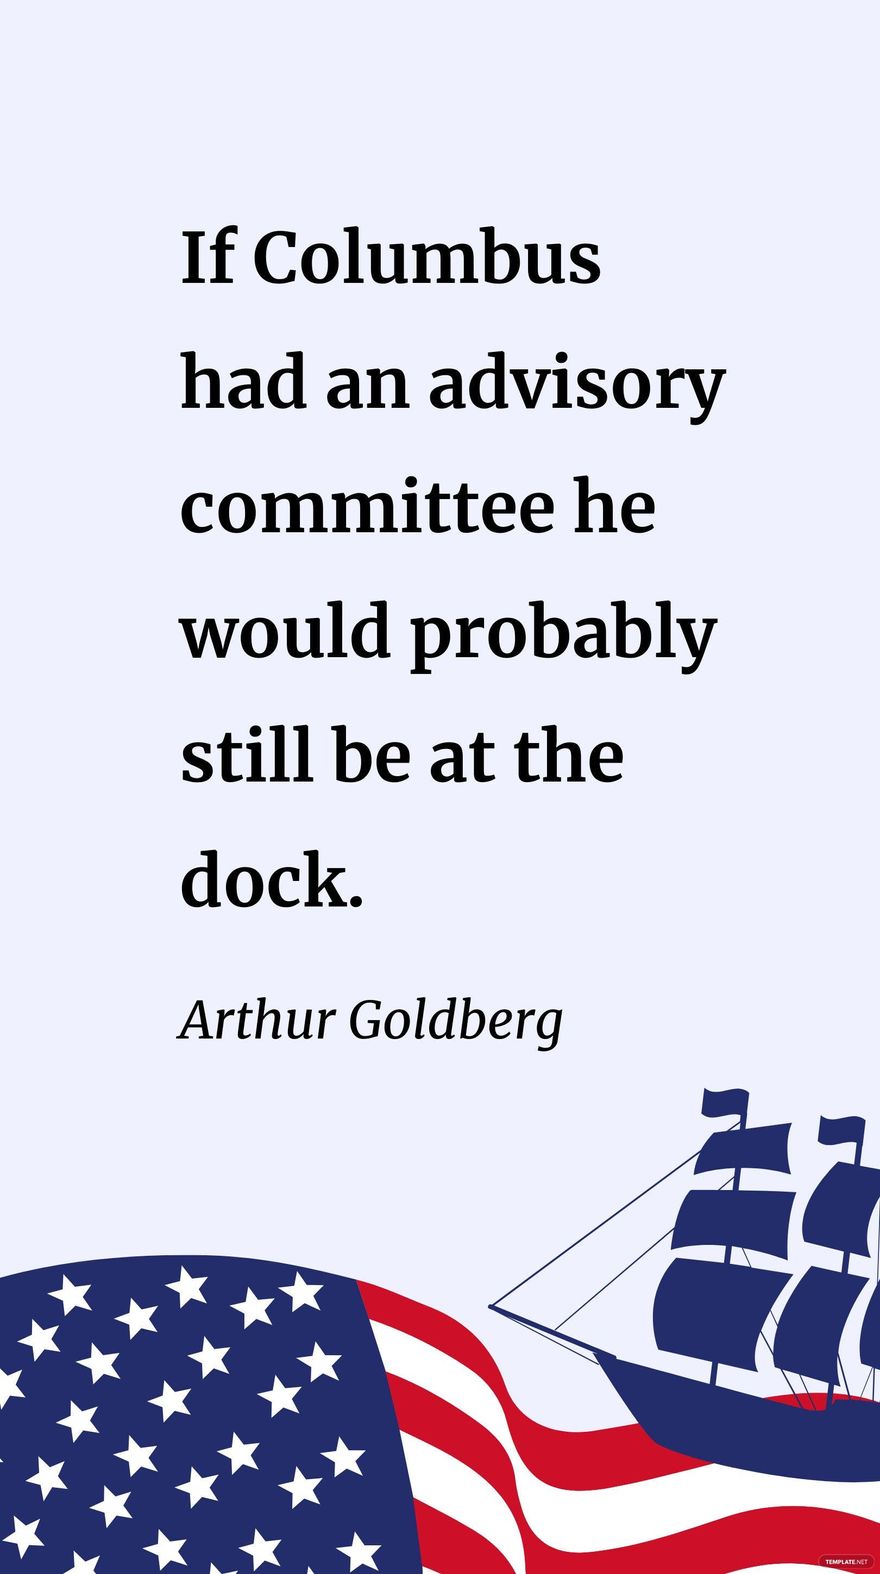 Free Arthur Goldberg- If Columbus had an advisory committee he would probably still be at the dock. in JPG